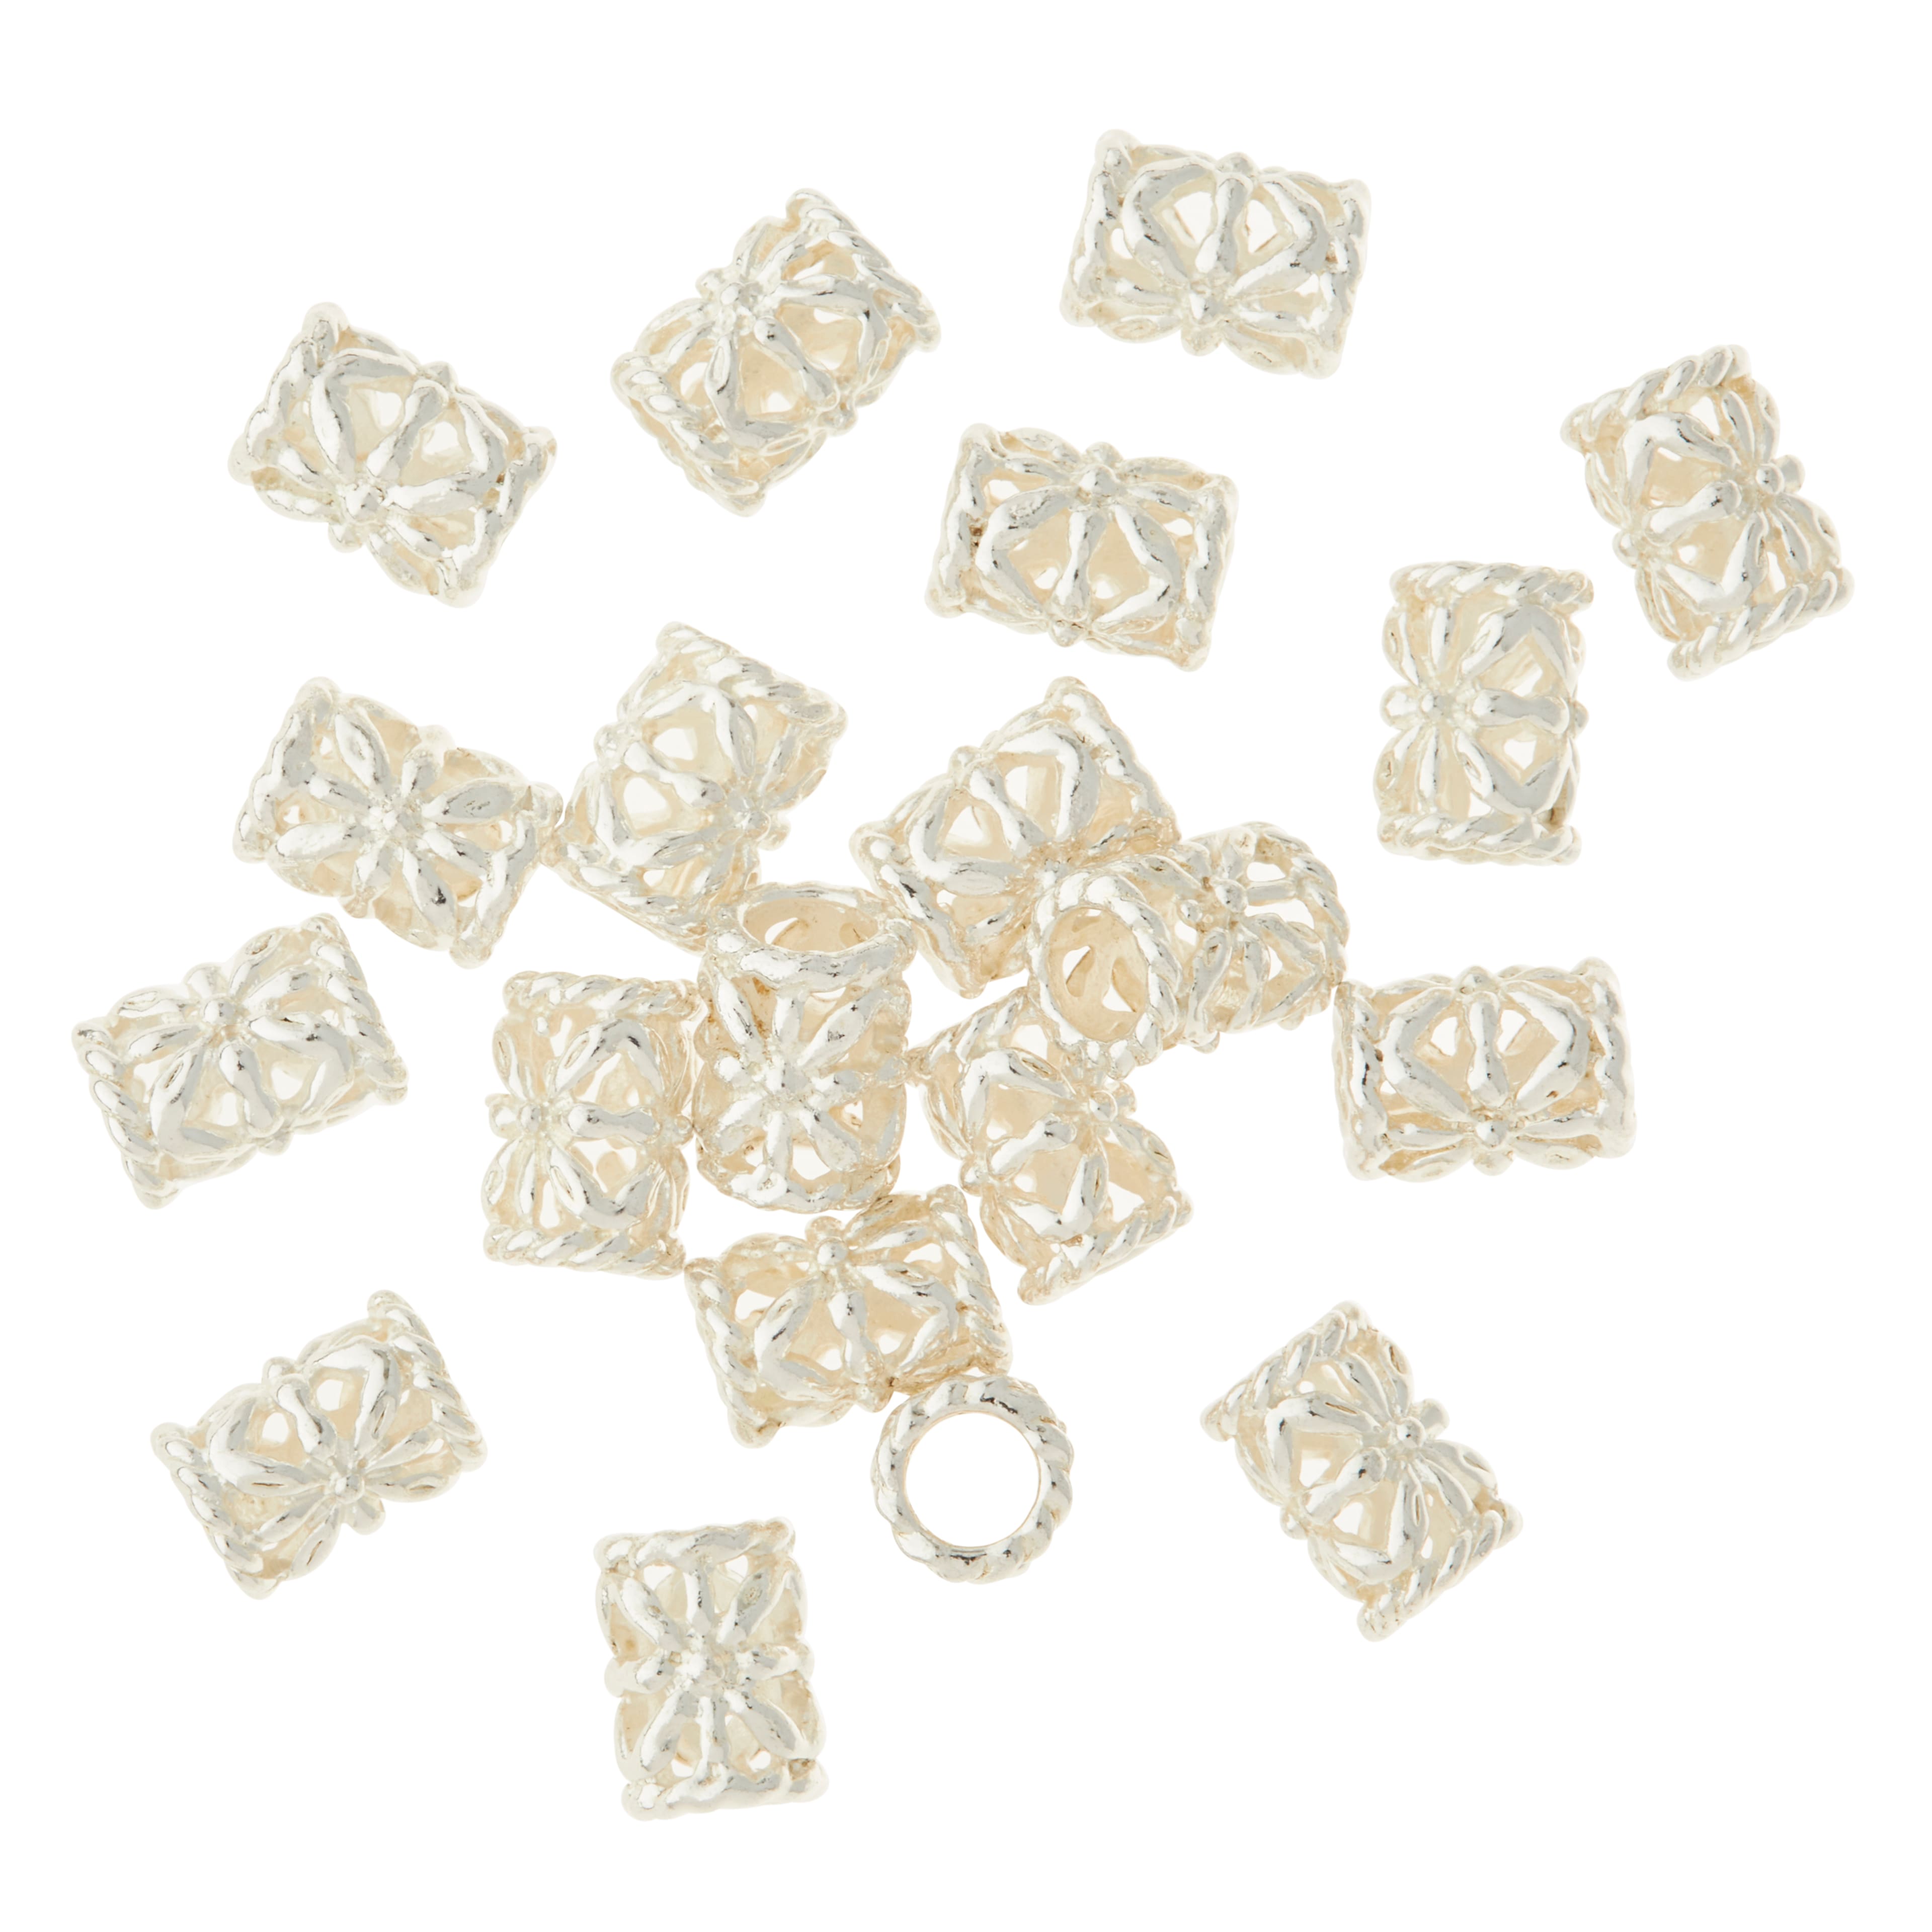 12 Packs: 200 ct. (2,400) Premium Metals Gold Spacer Beads by Bead